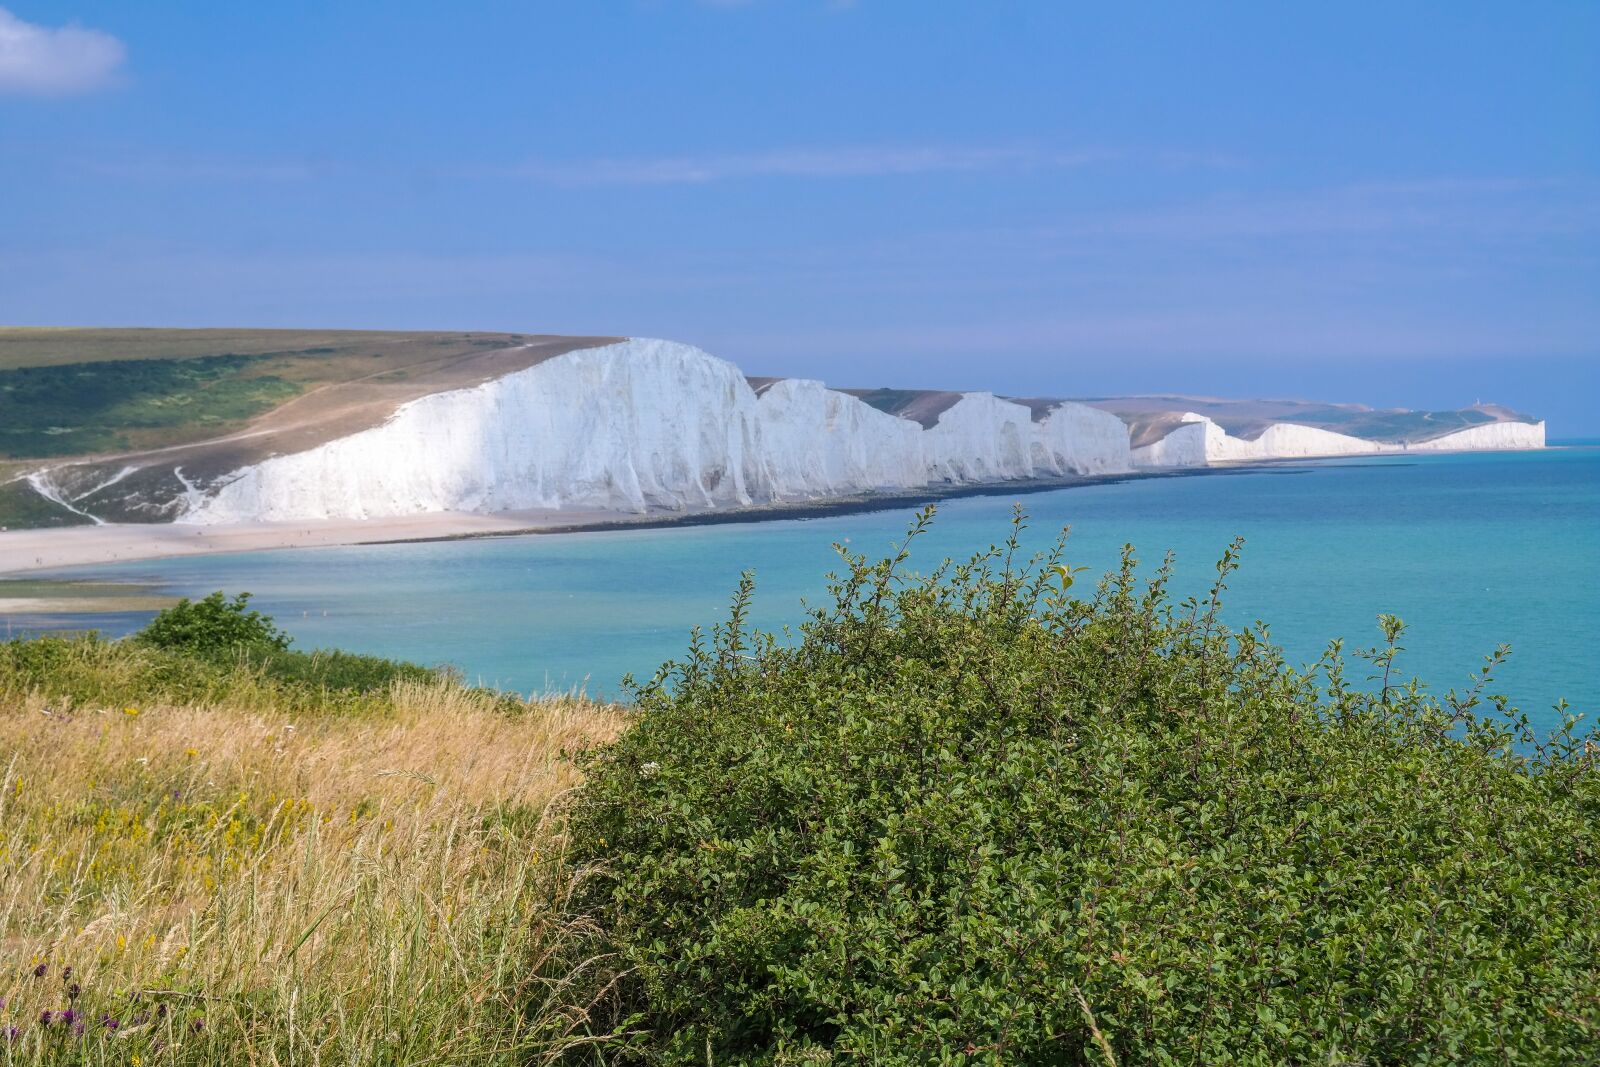 Samsung NX300 sample photo. Seven sisters, sussex, england photography